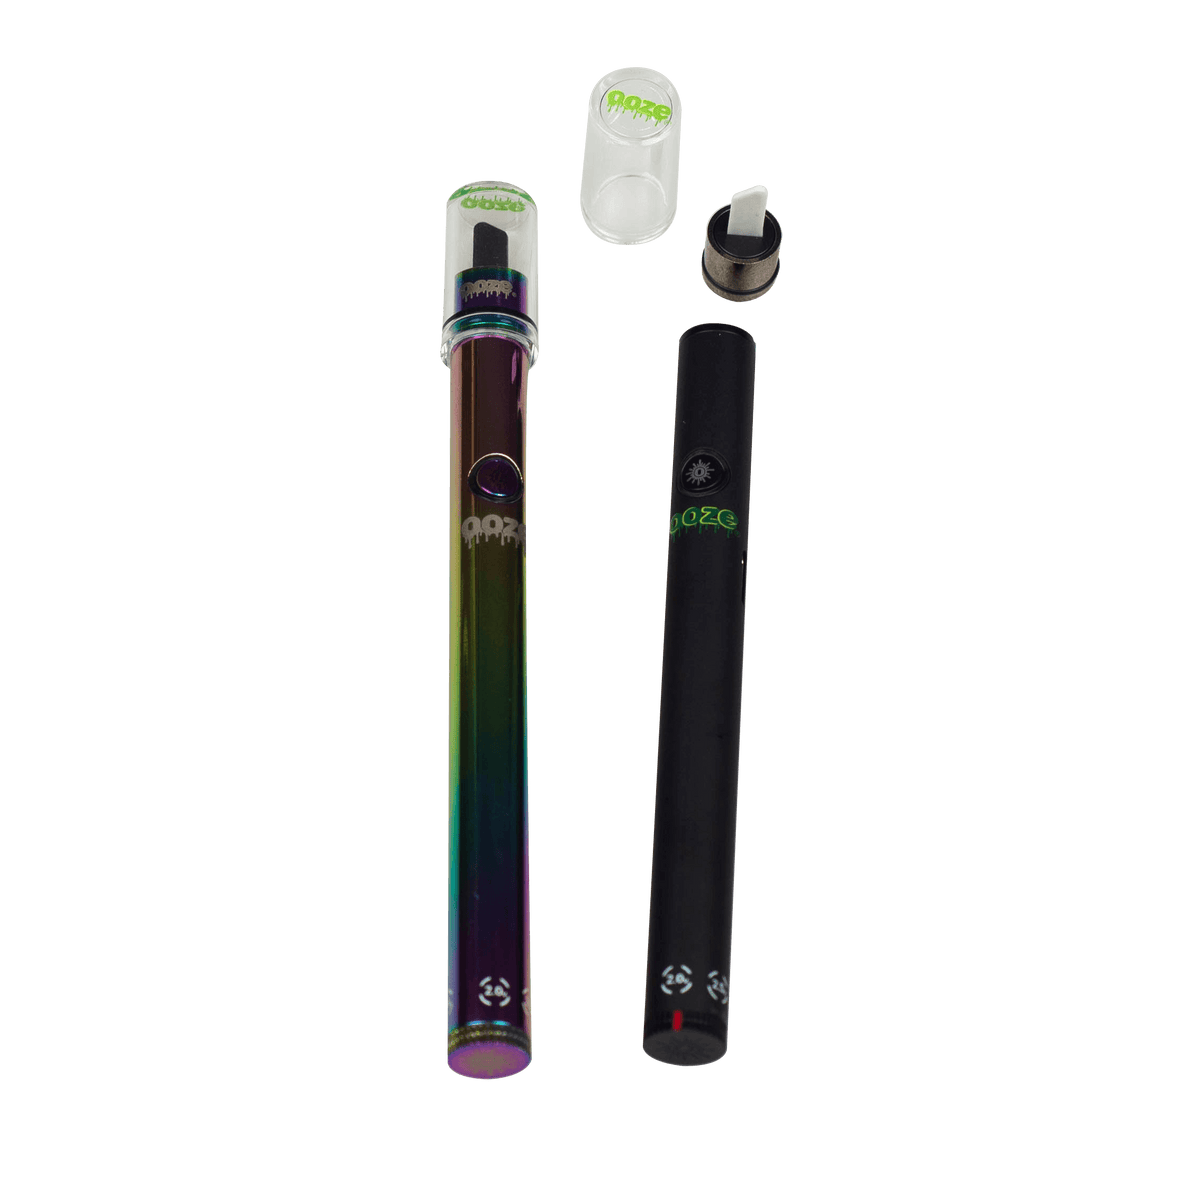 This is the Twist Hot Knife Kit by Ooze, available at Ritual Colorado. Featuring a ceramic tip, you can easily and cleanly drop your concentrate into your banger for easy and clean dabbing. Temperatures can be controlled through the twist knob on the bottom of the knife and it includes a cover so you can easily pack up and go without any mess.